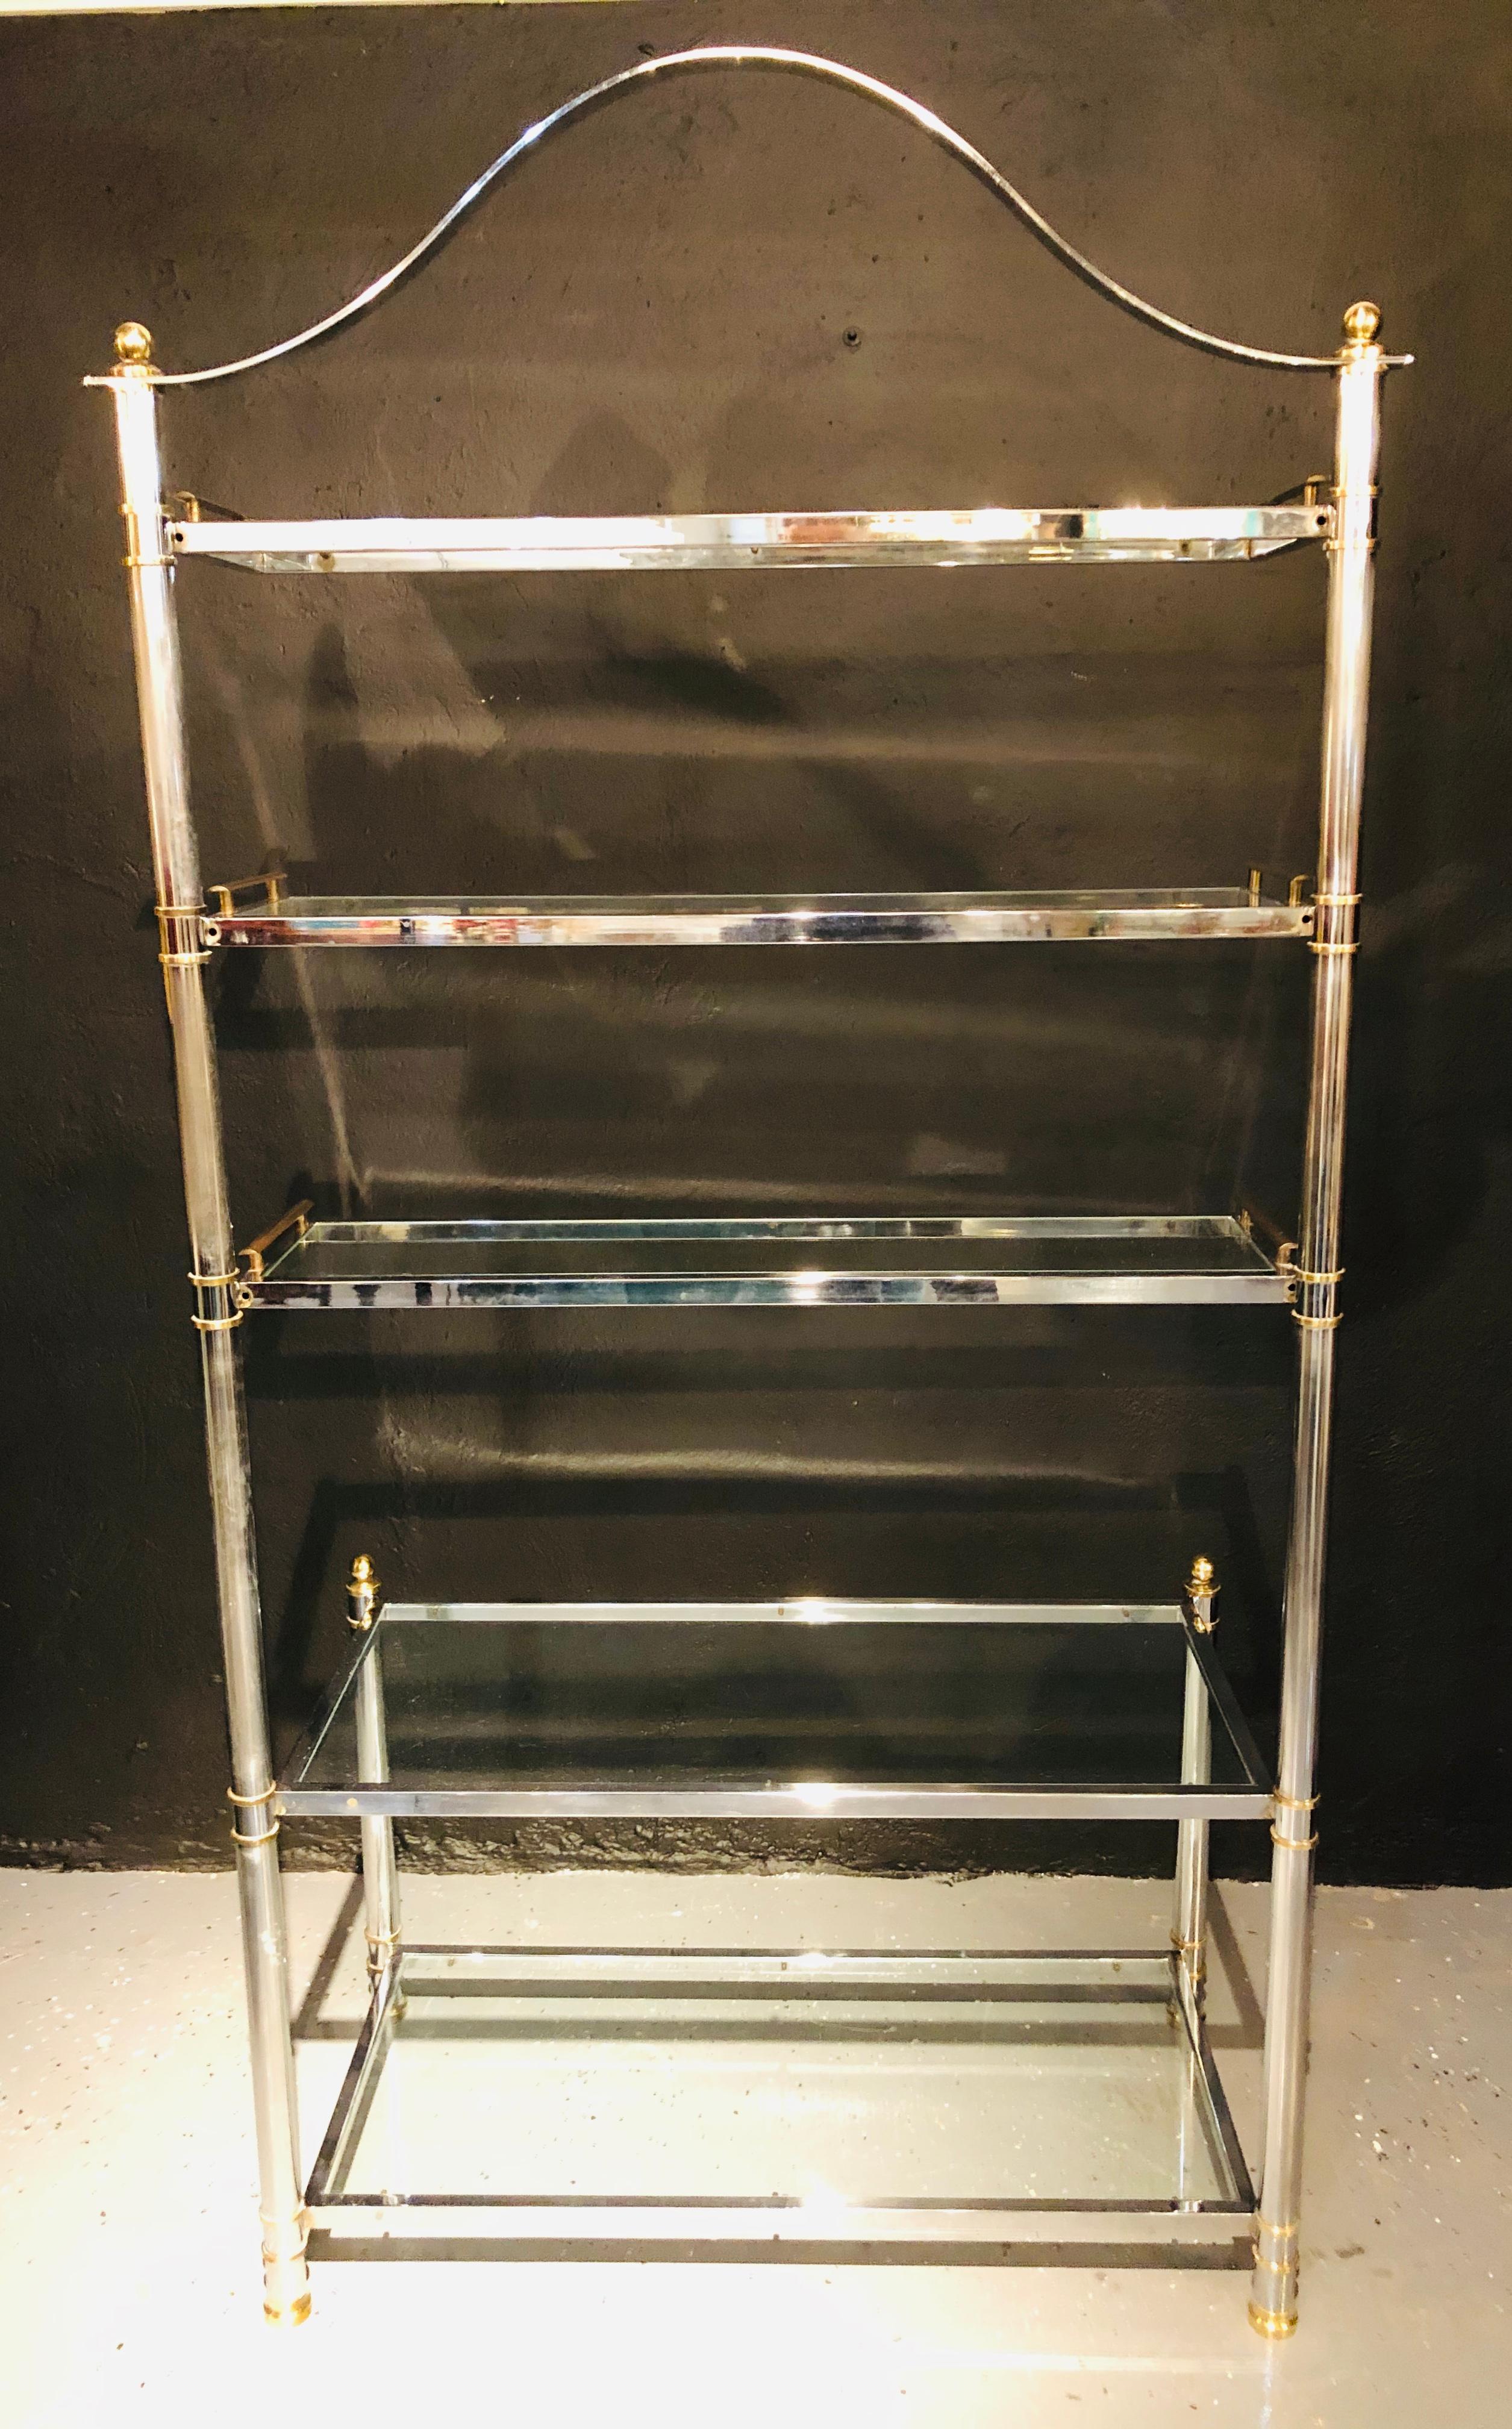 Maison Jansen style Hollywood Regency étagère or bookcase. Having a brass and steel design this stunning example of a finely cast five shelf bookcase or étagère depicts the era of Hollywood glitz and glamour at its peck. The two lower shelves about